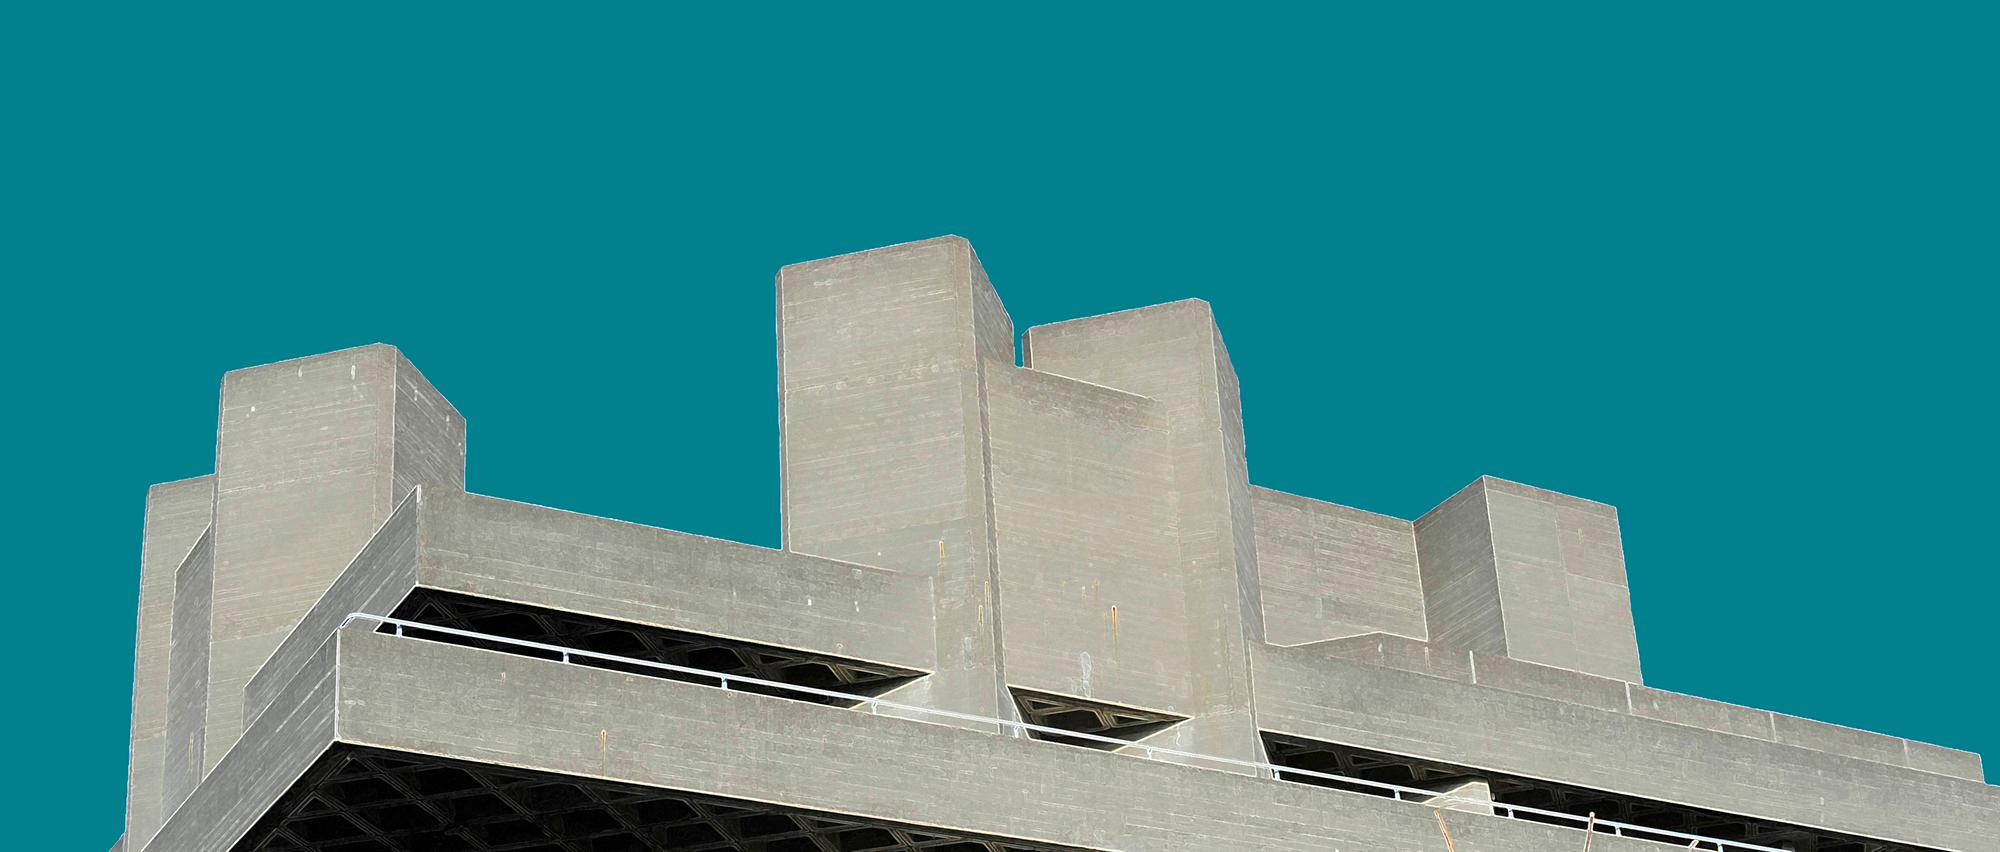 National Theatre, Teal By Michael Wallner [2019]

limited_edition
Brushed aluminium
Edition number 25
Image size: H:60 cm x W:145 cm
Complete Size of Unframed Work: H:60 cm x W:145 cm x D:0.3cm
Sold Unframed
Please note that insitu images are purely